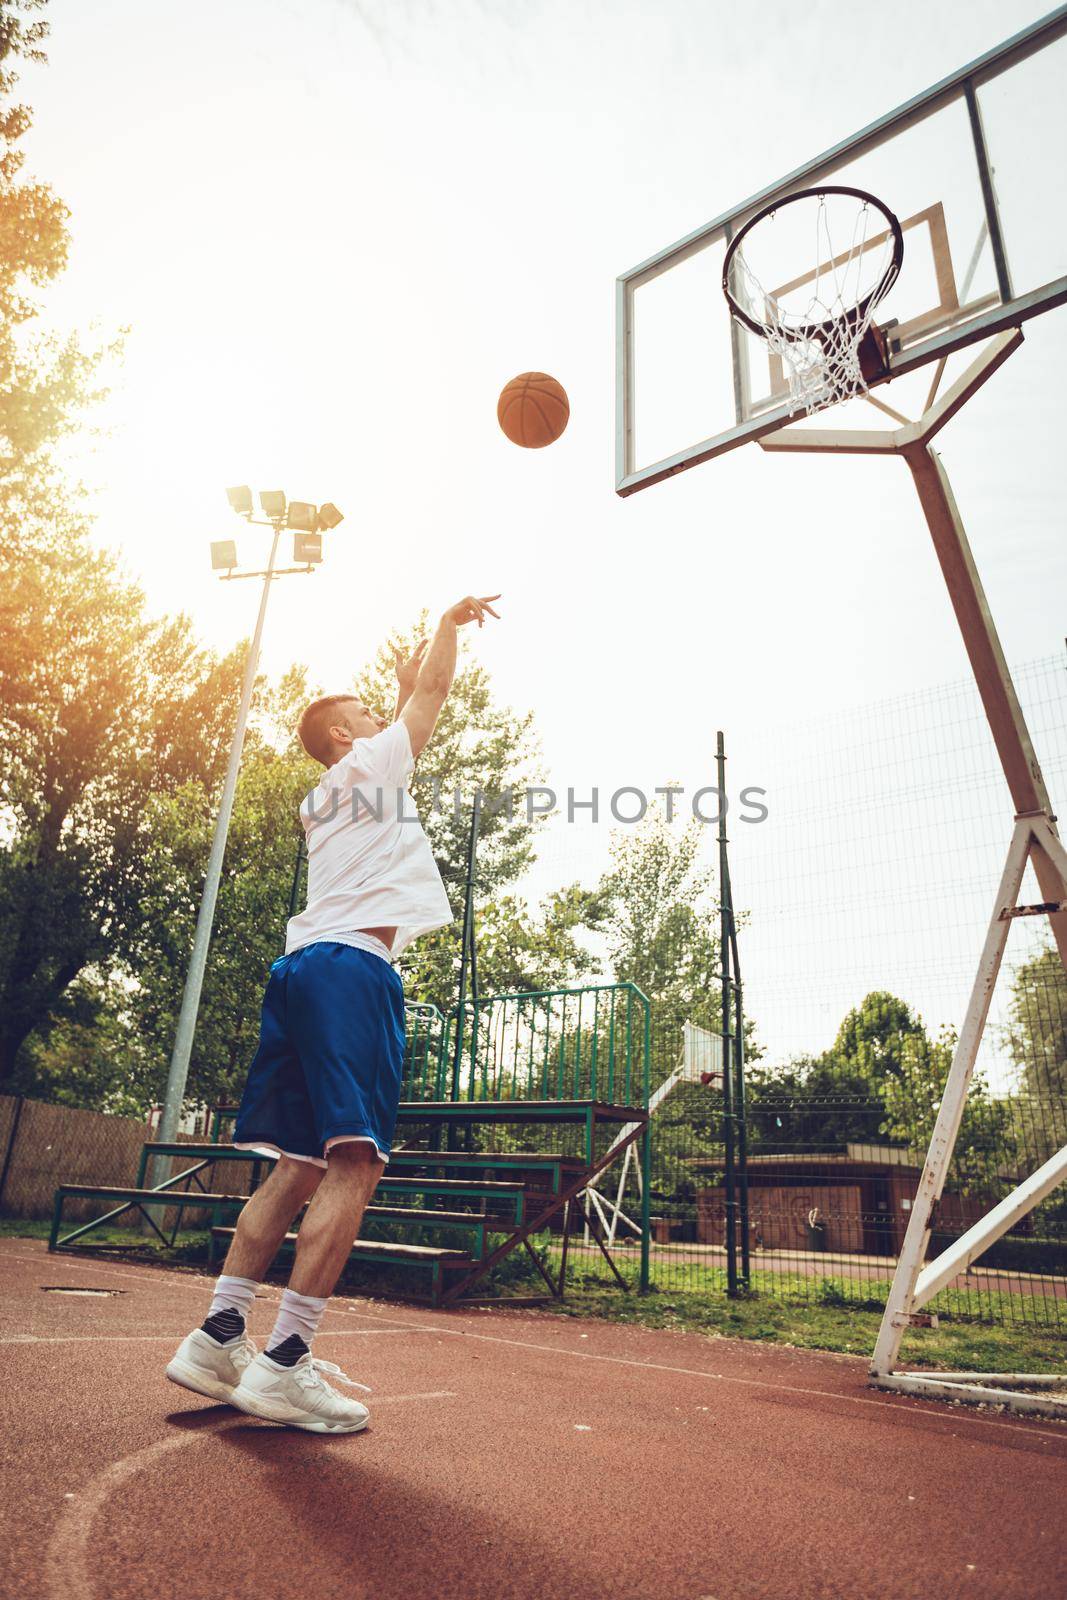 Young street basketball player showing his skills on court. He throw dunk.